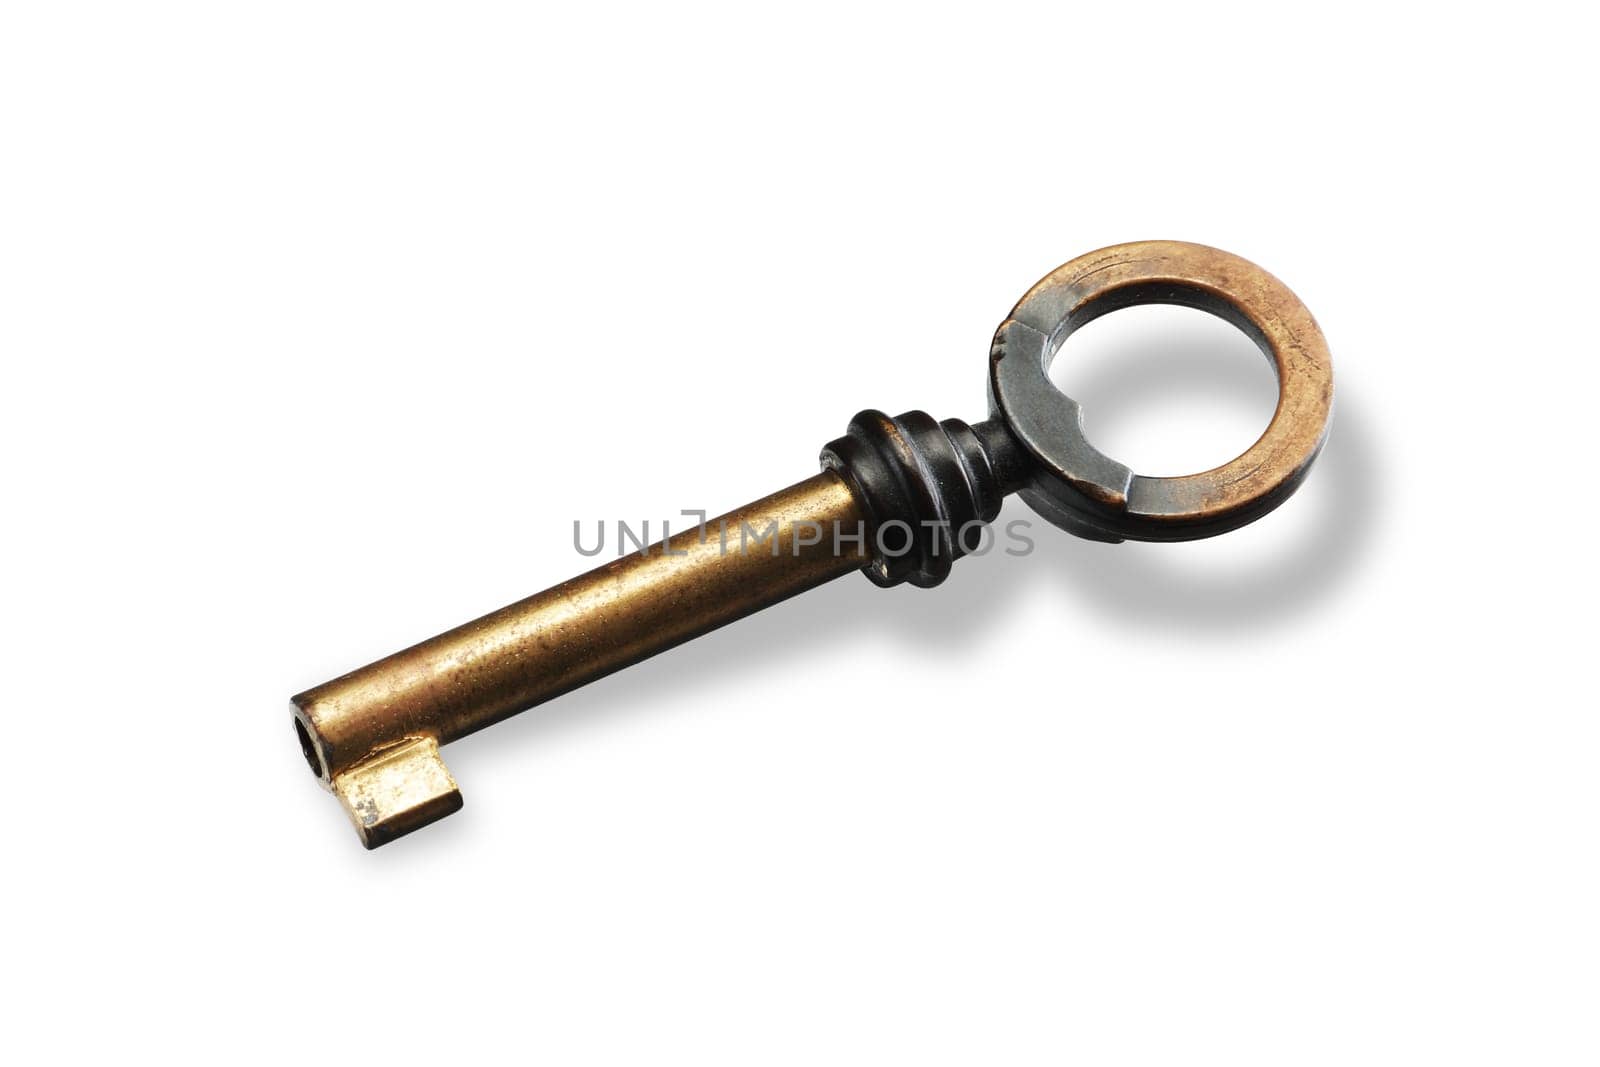 A brass key on white background with shadow